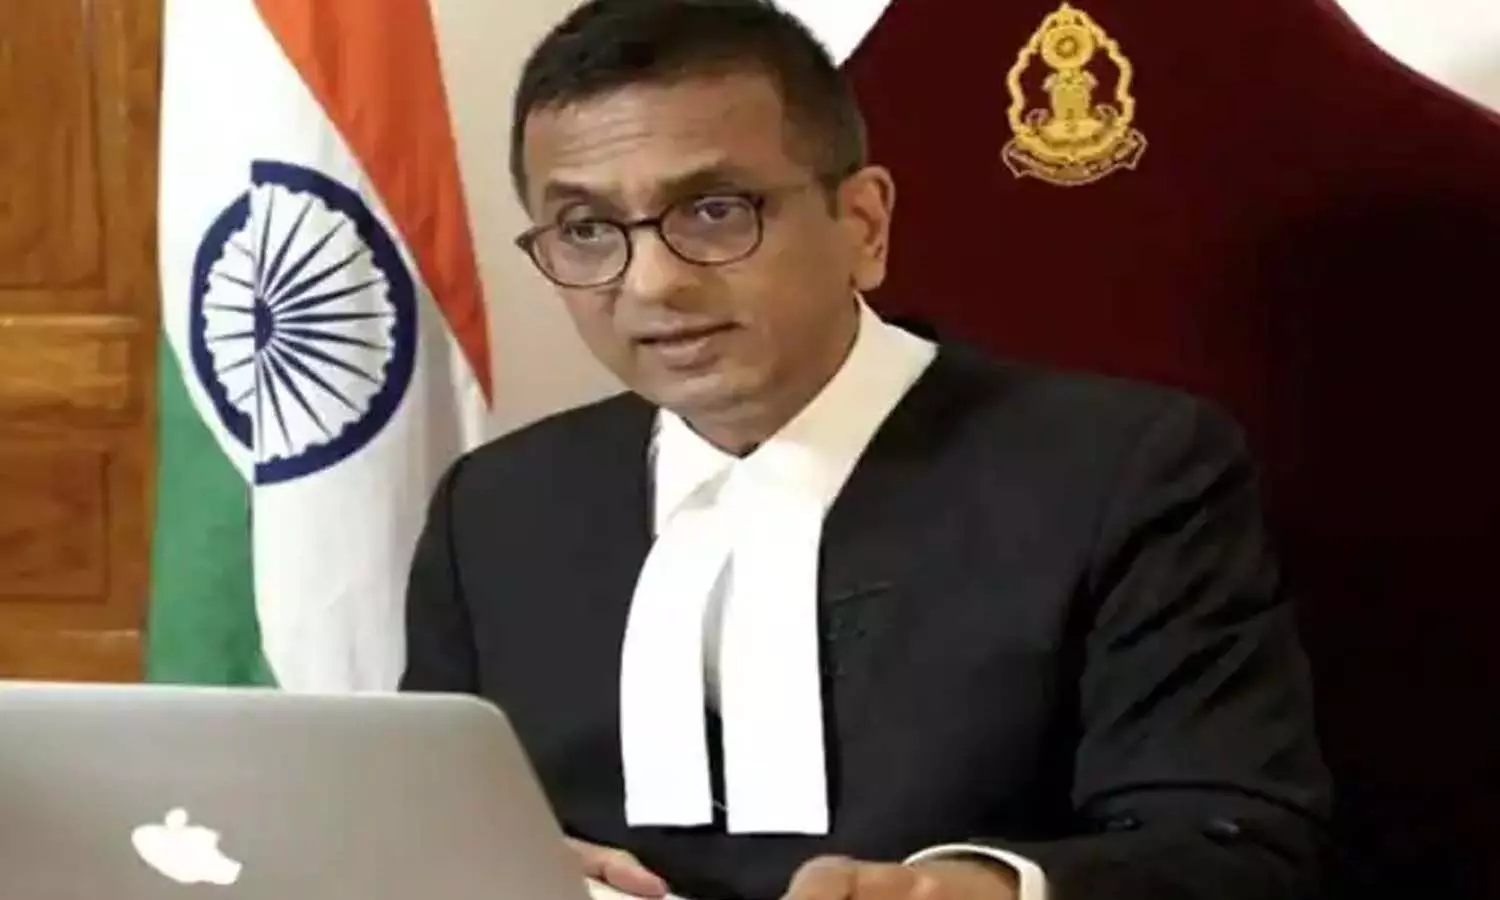 Justice Chandrachud will be the next CJI of the country, father has also been Chief Justice